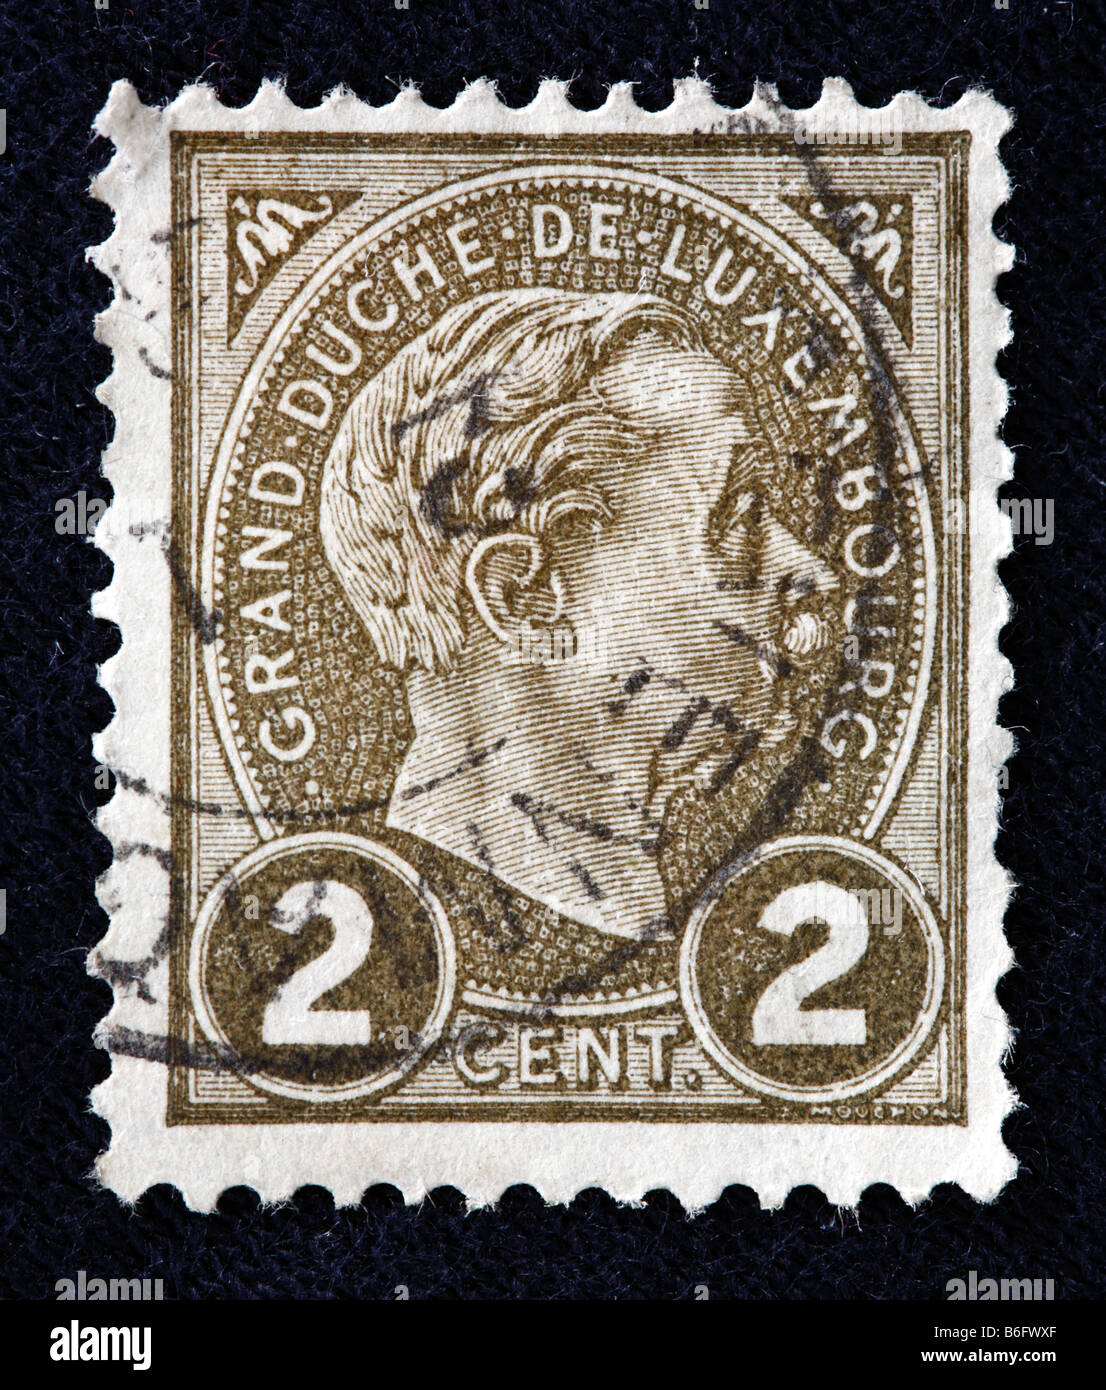 Adolphe I, Grand Duke of Luxembourg (1890-1905), postage stamp, Luxembourg Stock Photo